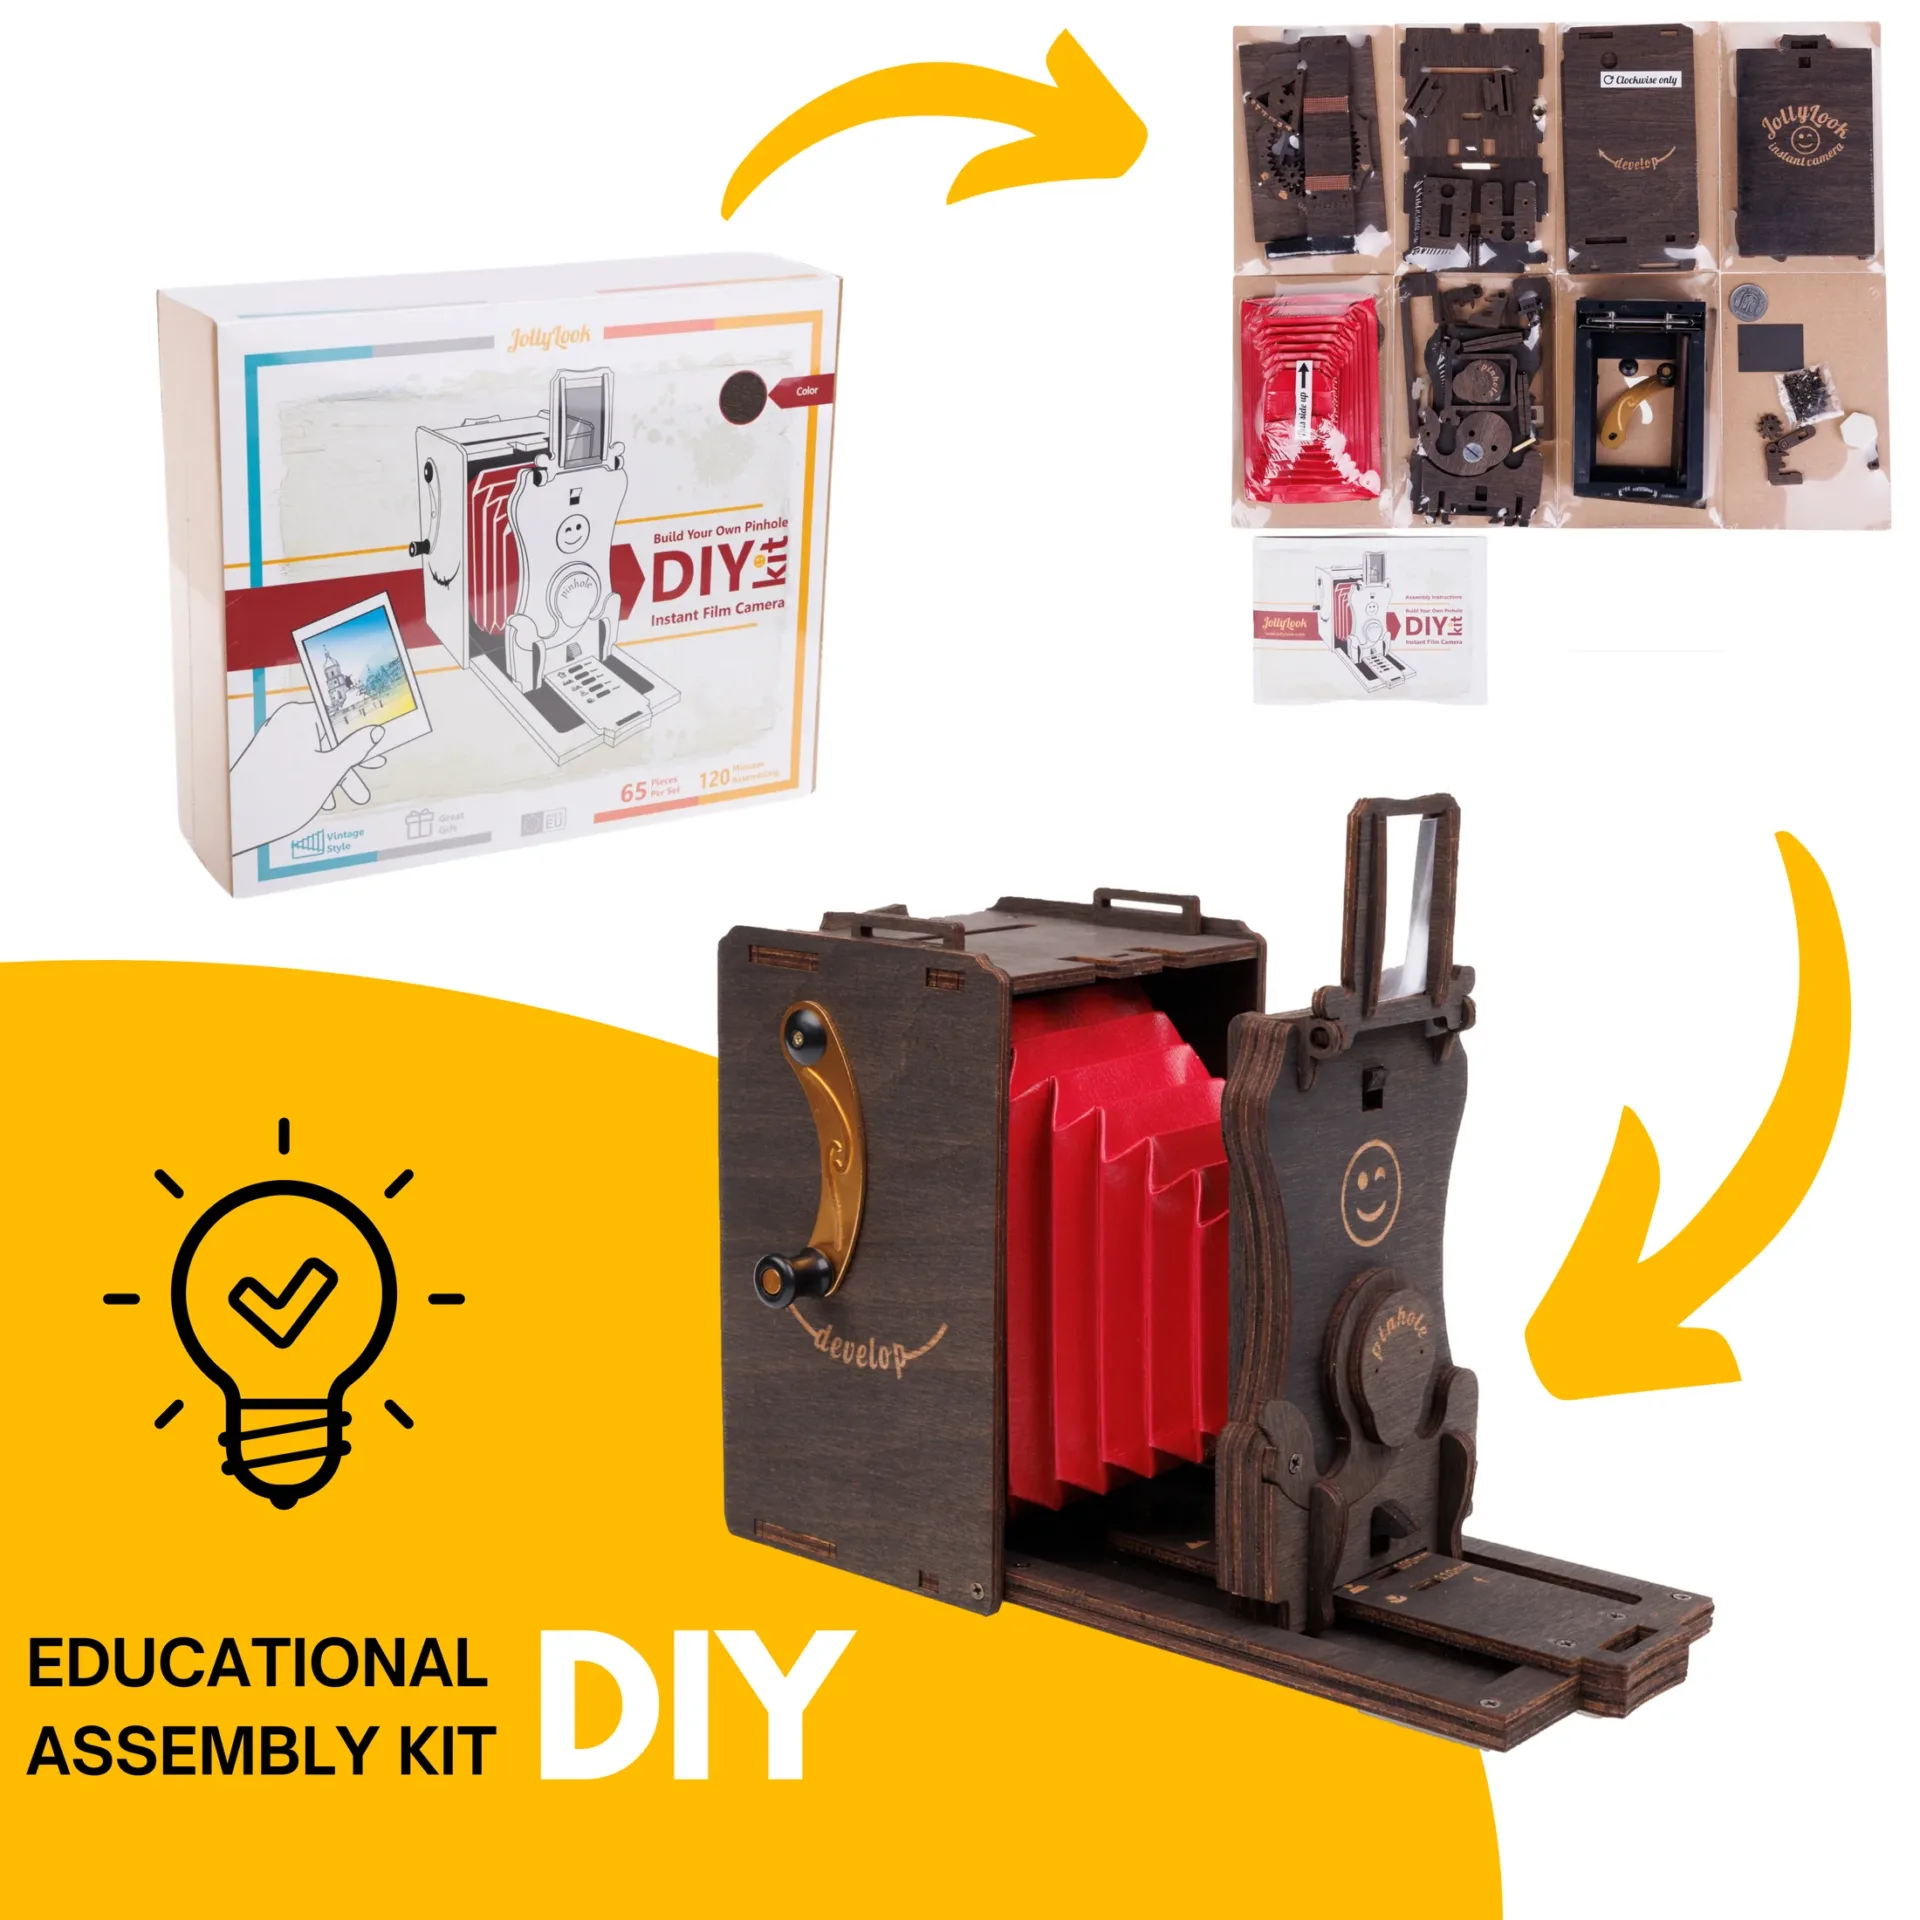 Three stages of the DIY Pinhole Instant Film Camera Kit for Self Assembly in a Stained Brown variant c5cde2f5 c9e4 40e5 952d eff245a5ccac 2200x.png